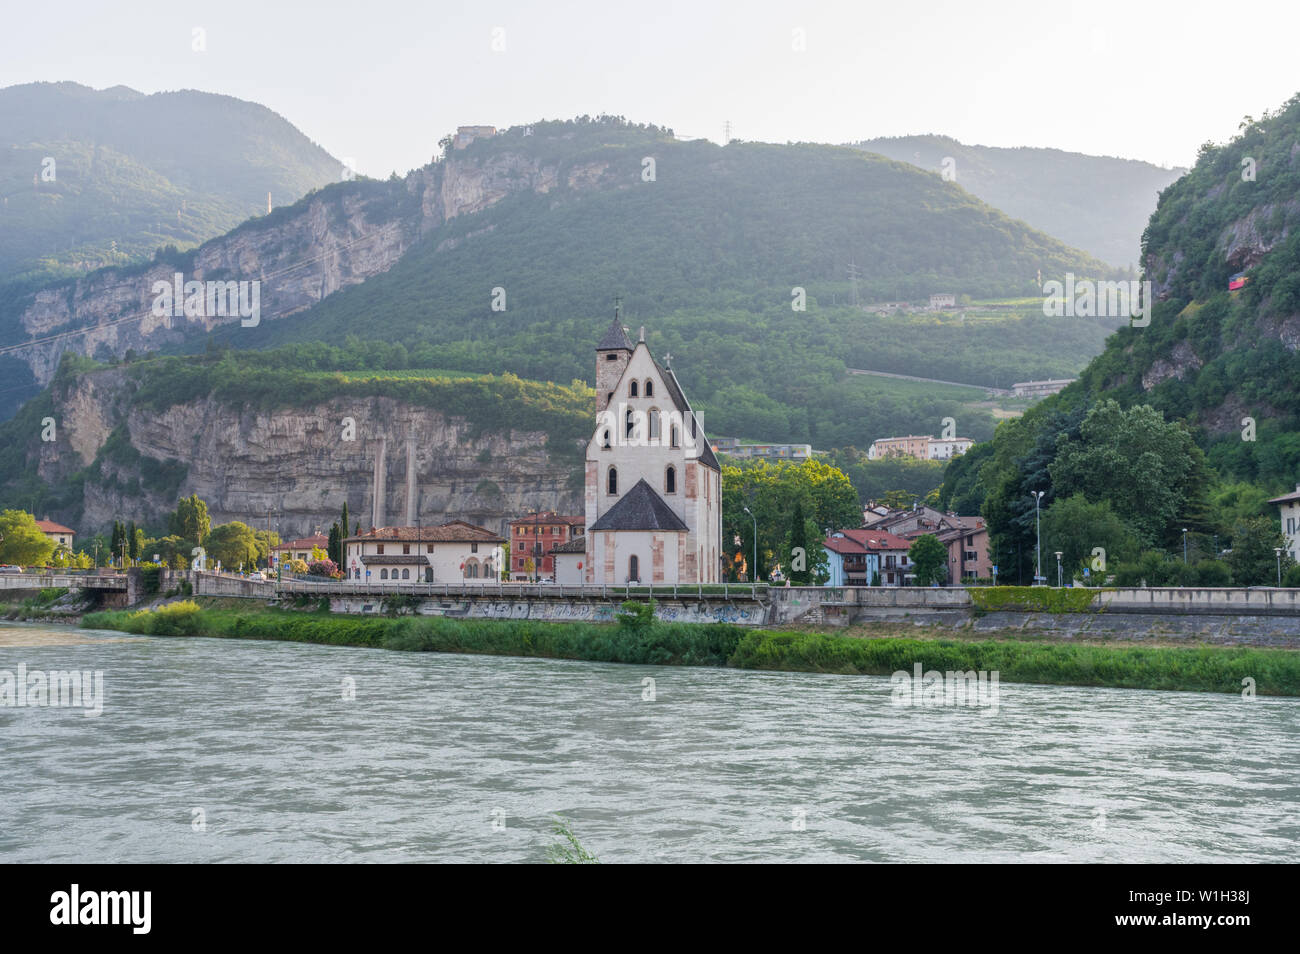 Trento, Italy (30th June 2019) - The church of St. Apollinare, built in the XIII Century, on the shoreline of the river Adige Stock Photo